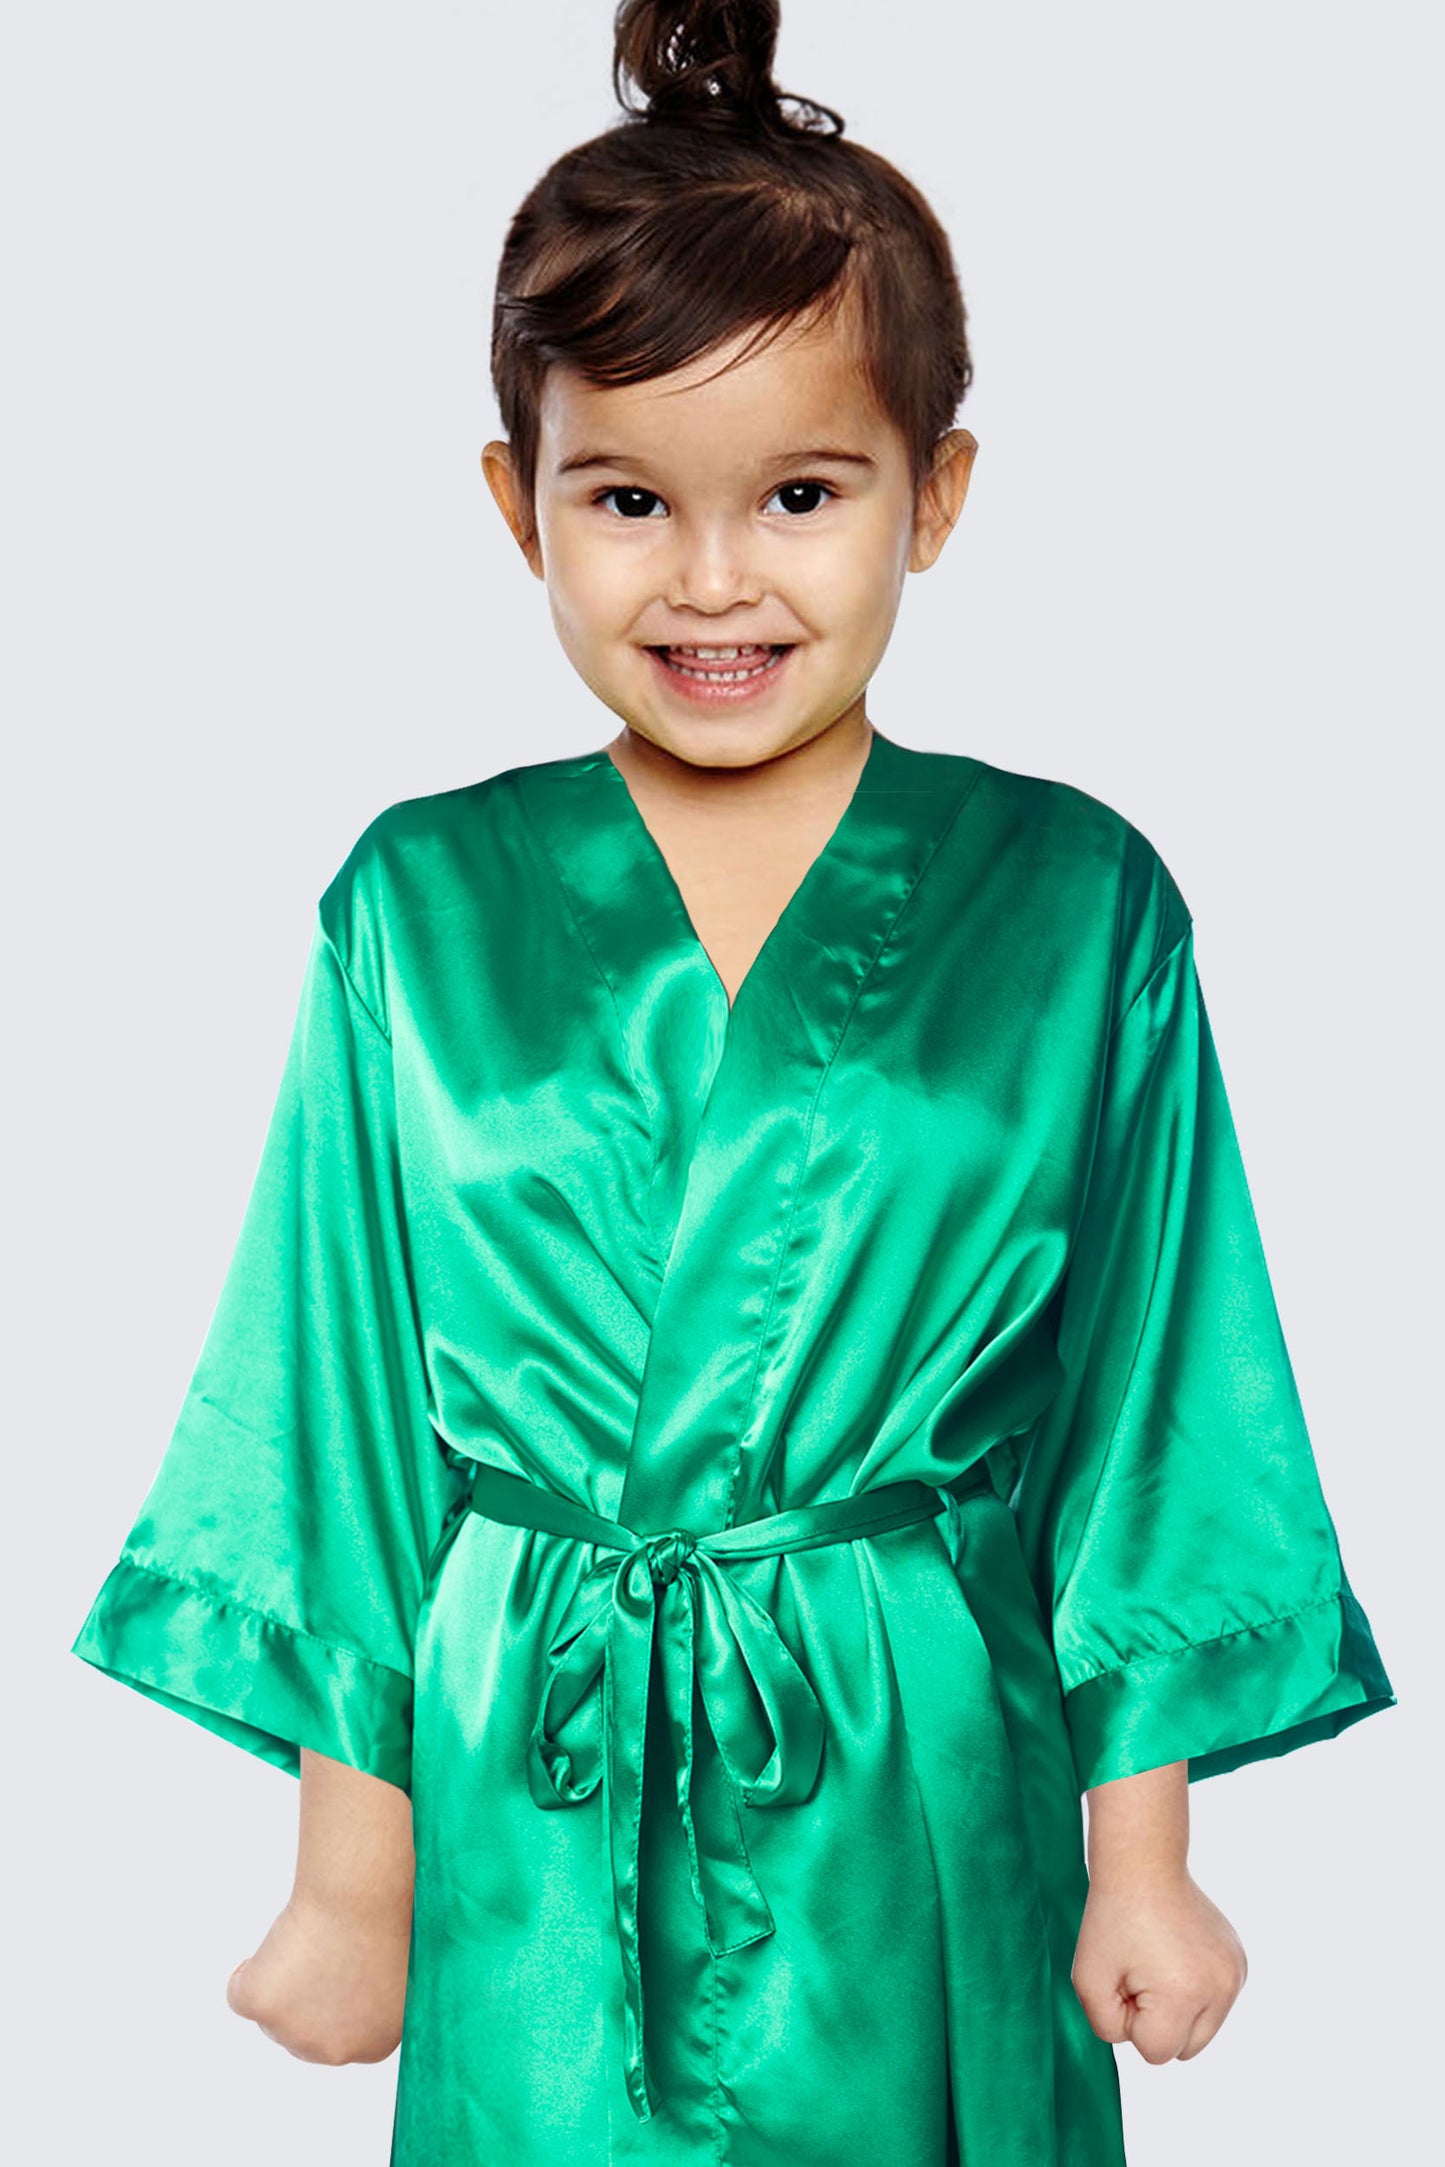 a little girl wearing a green robe and smiling